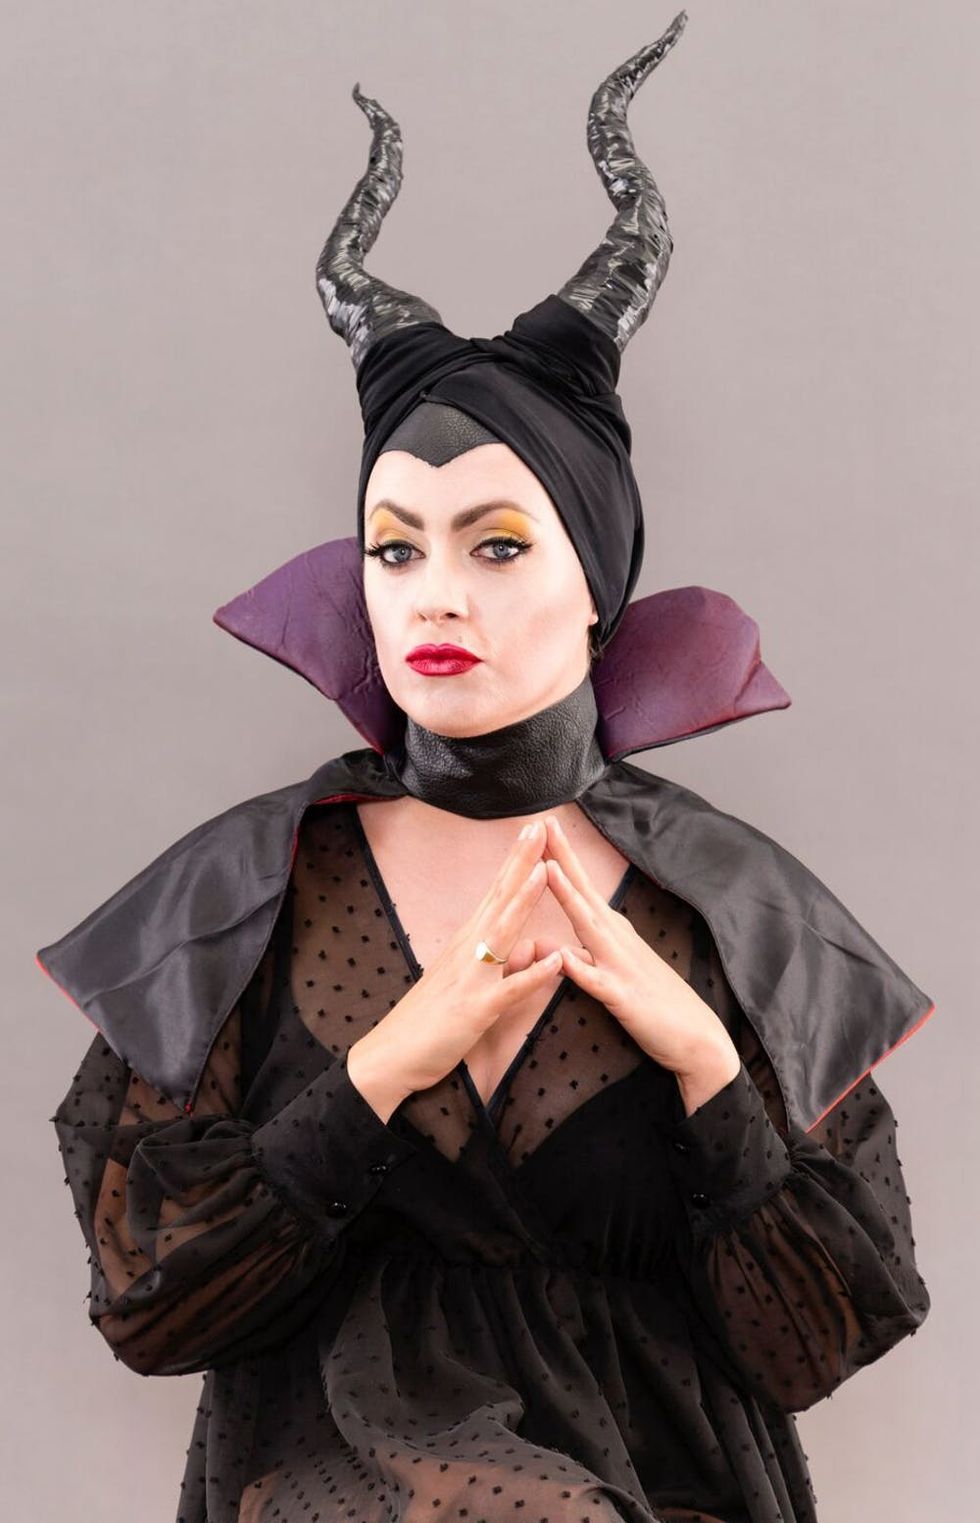 Mischievous woman dressed as Maleficent. 